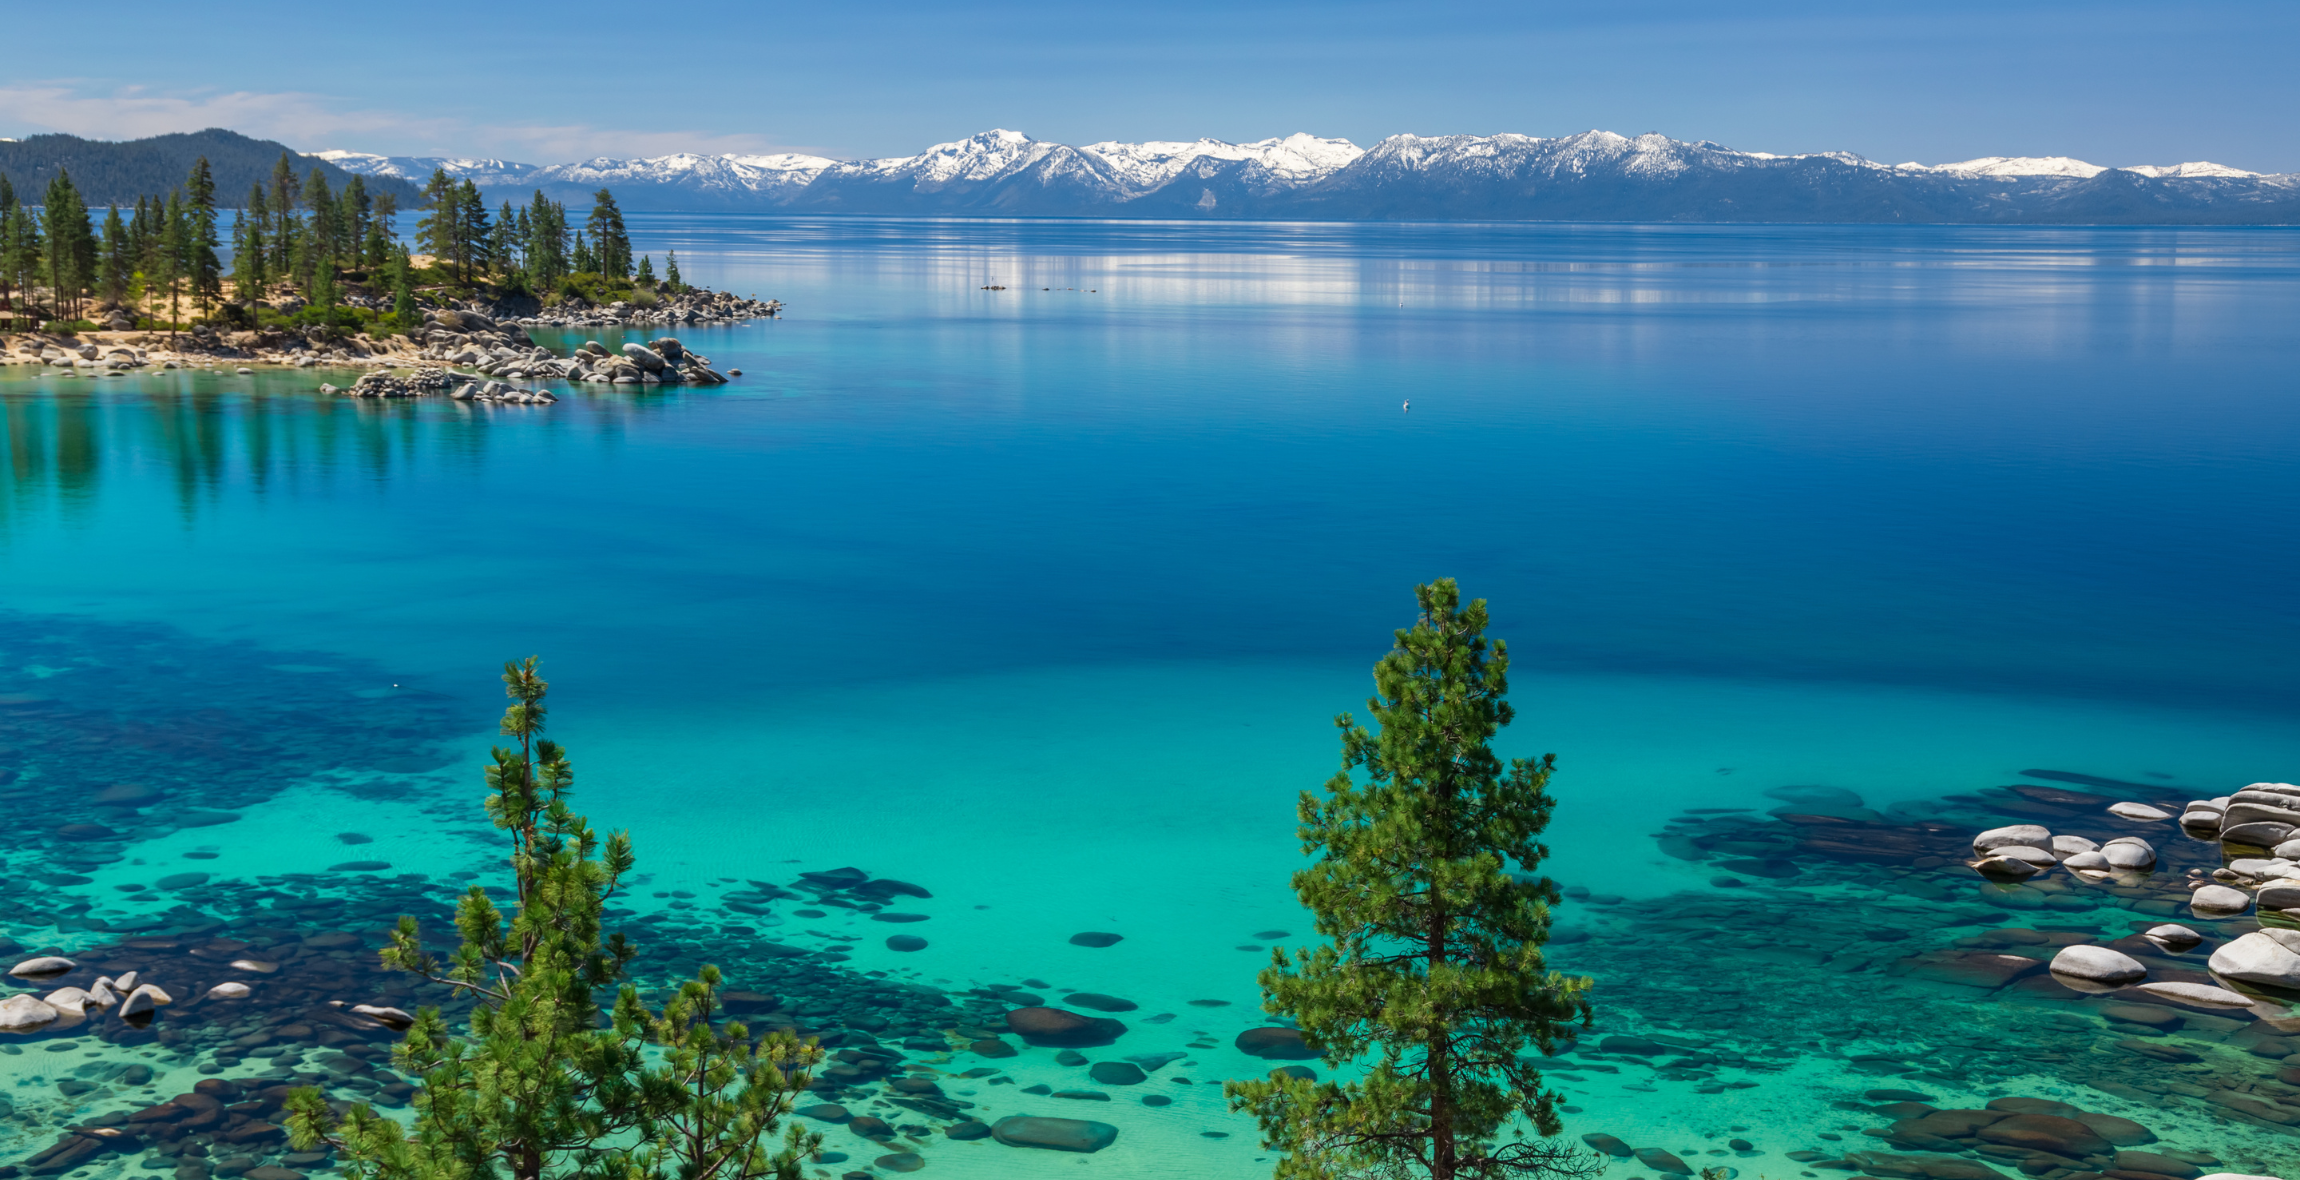 Lake Tahoe, in California with mountains in the background